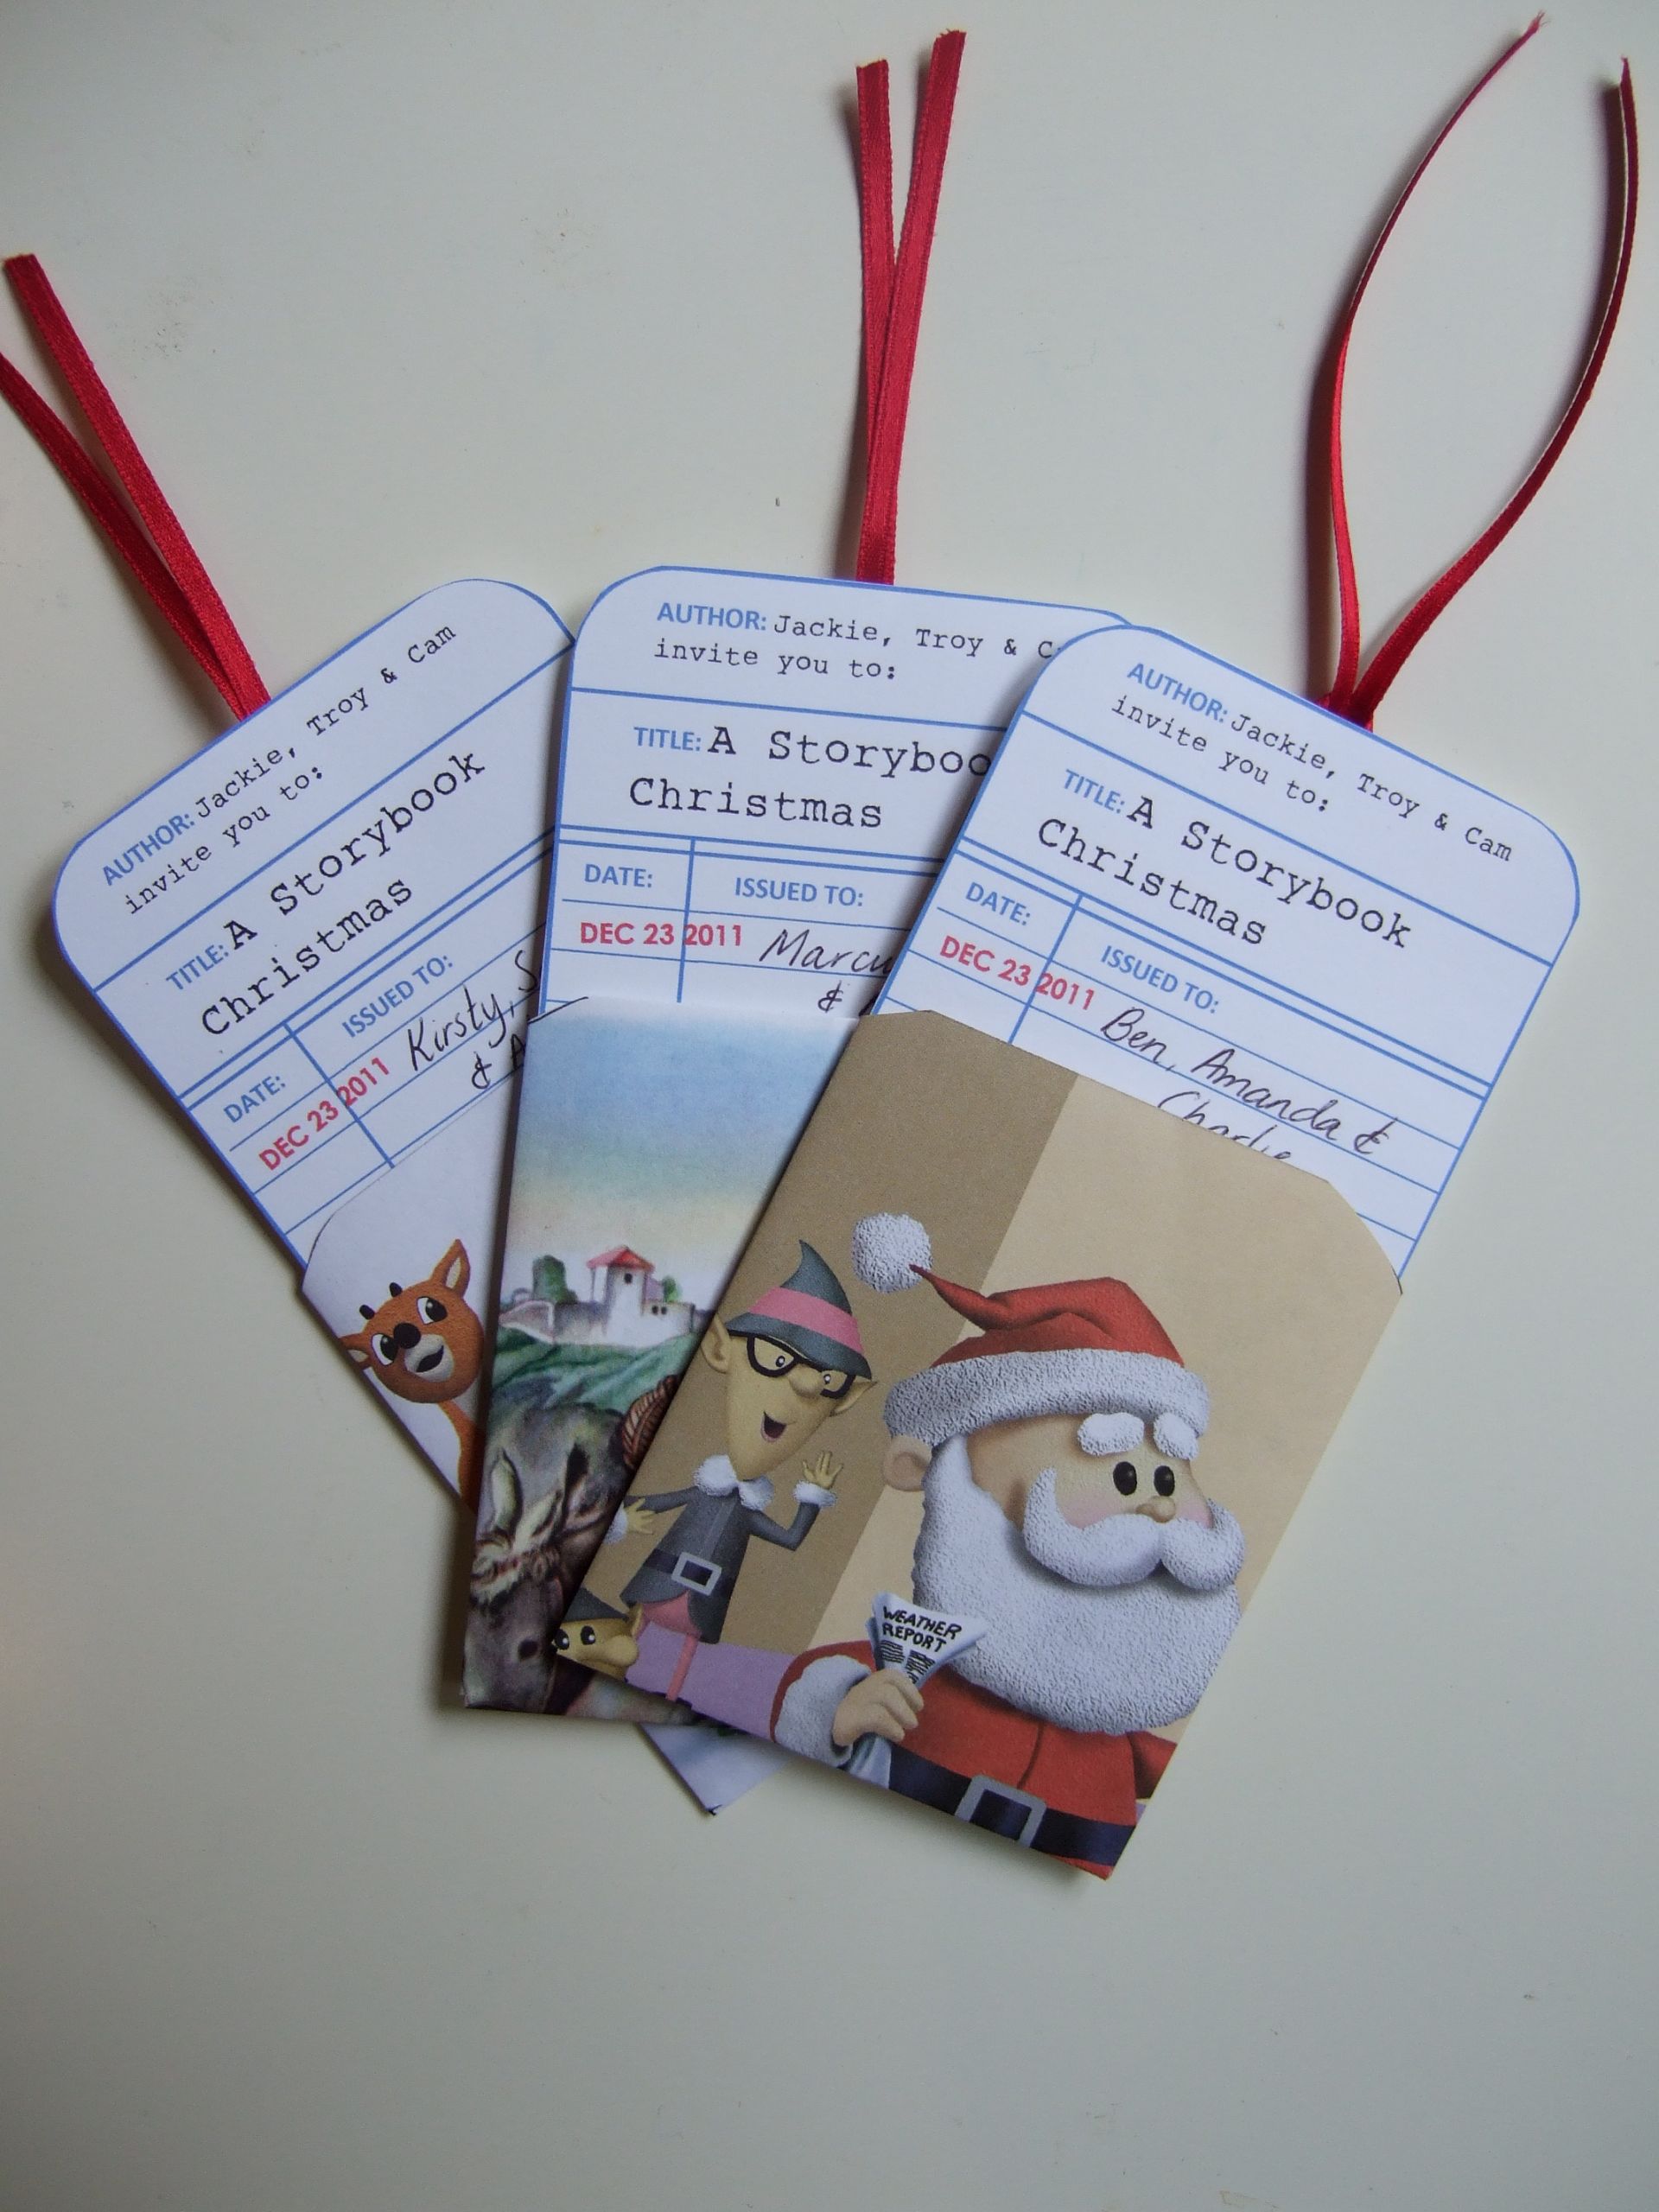 Book Club Christmas Party Ideas
 A Storybook Christmas Party The Invitations